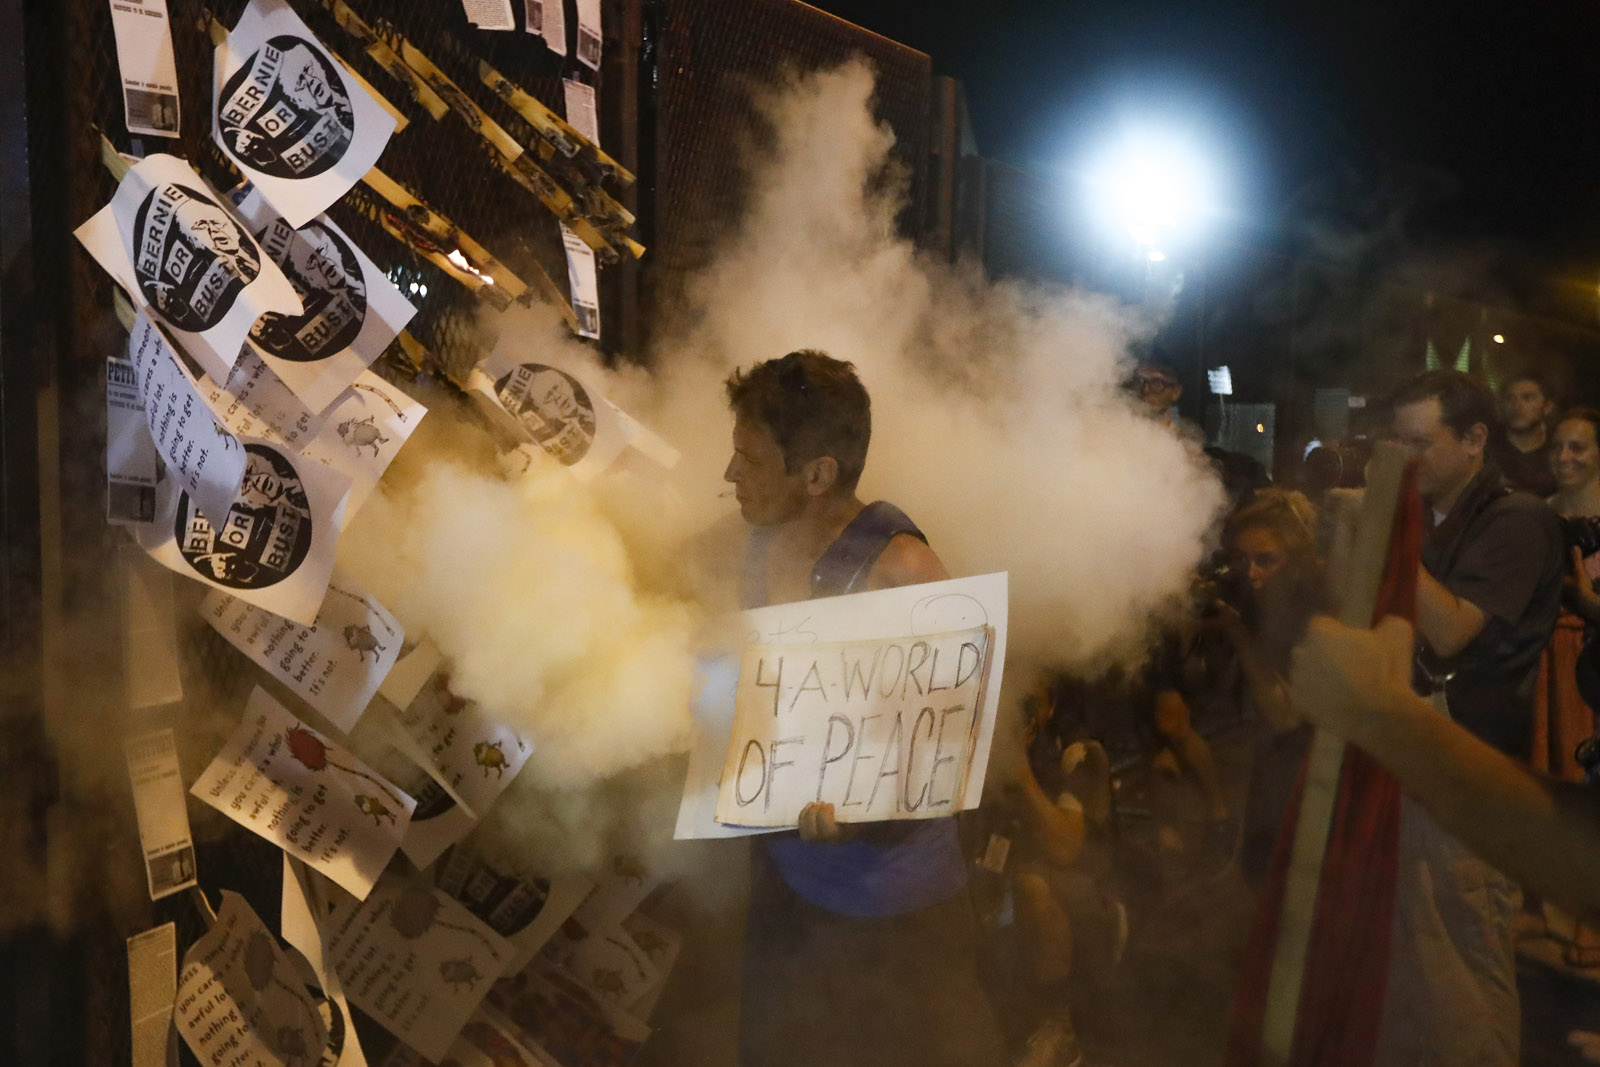 A demonstrator is enveloped in a cloud of fire extinguisher as fliers stuck into a police barricade bearing "Bernie or Bust" logos burn near AT&amp;T Station during a protest in Philadelphia, Tuesday, July 26, 2016, during the second day of the Democratic National Convention. (AP Photo/John Minchillo)